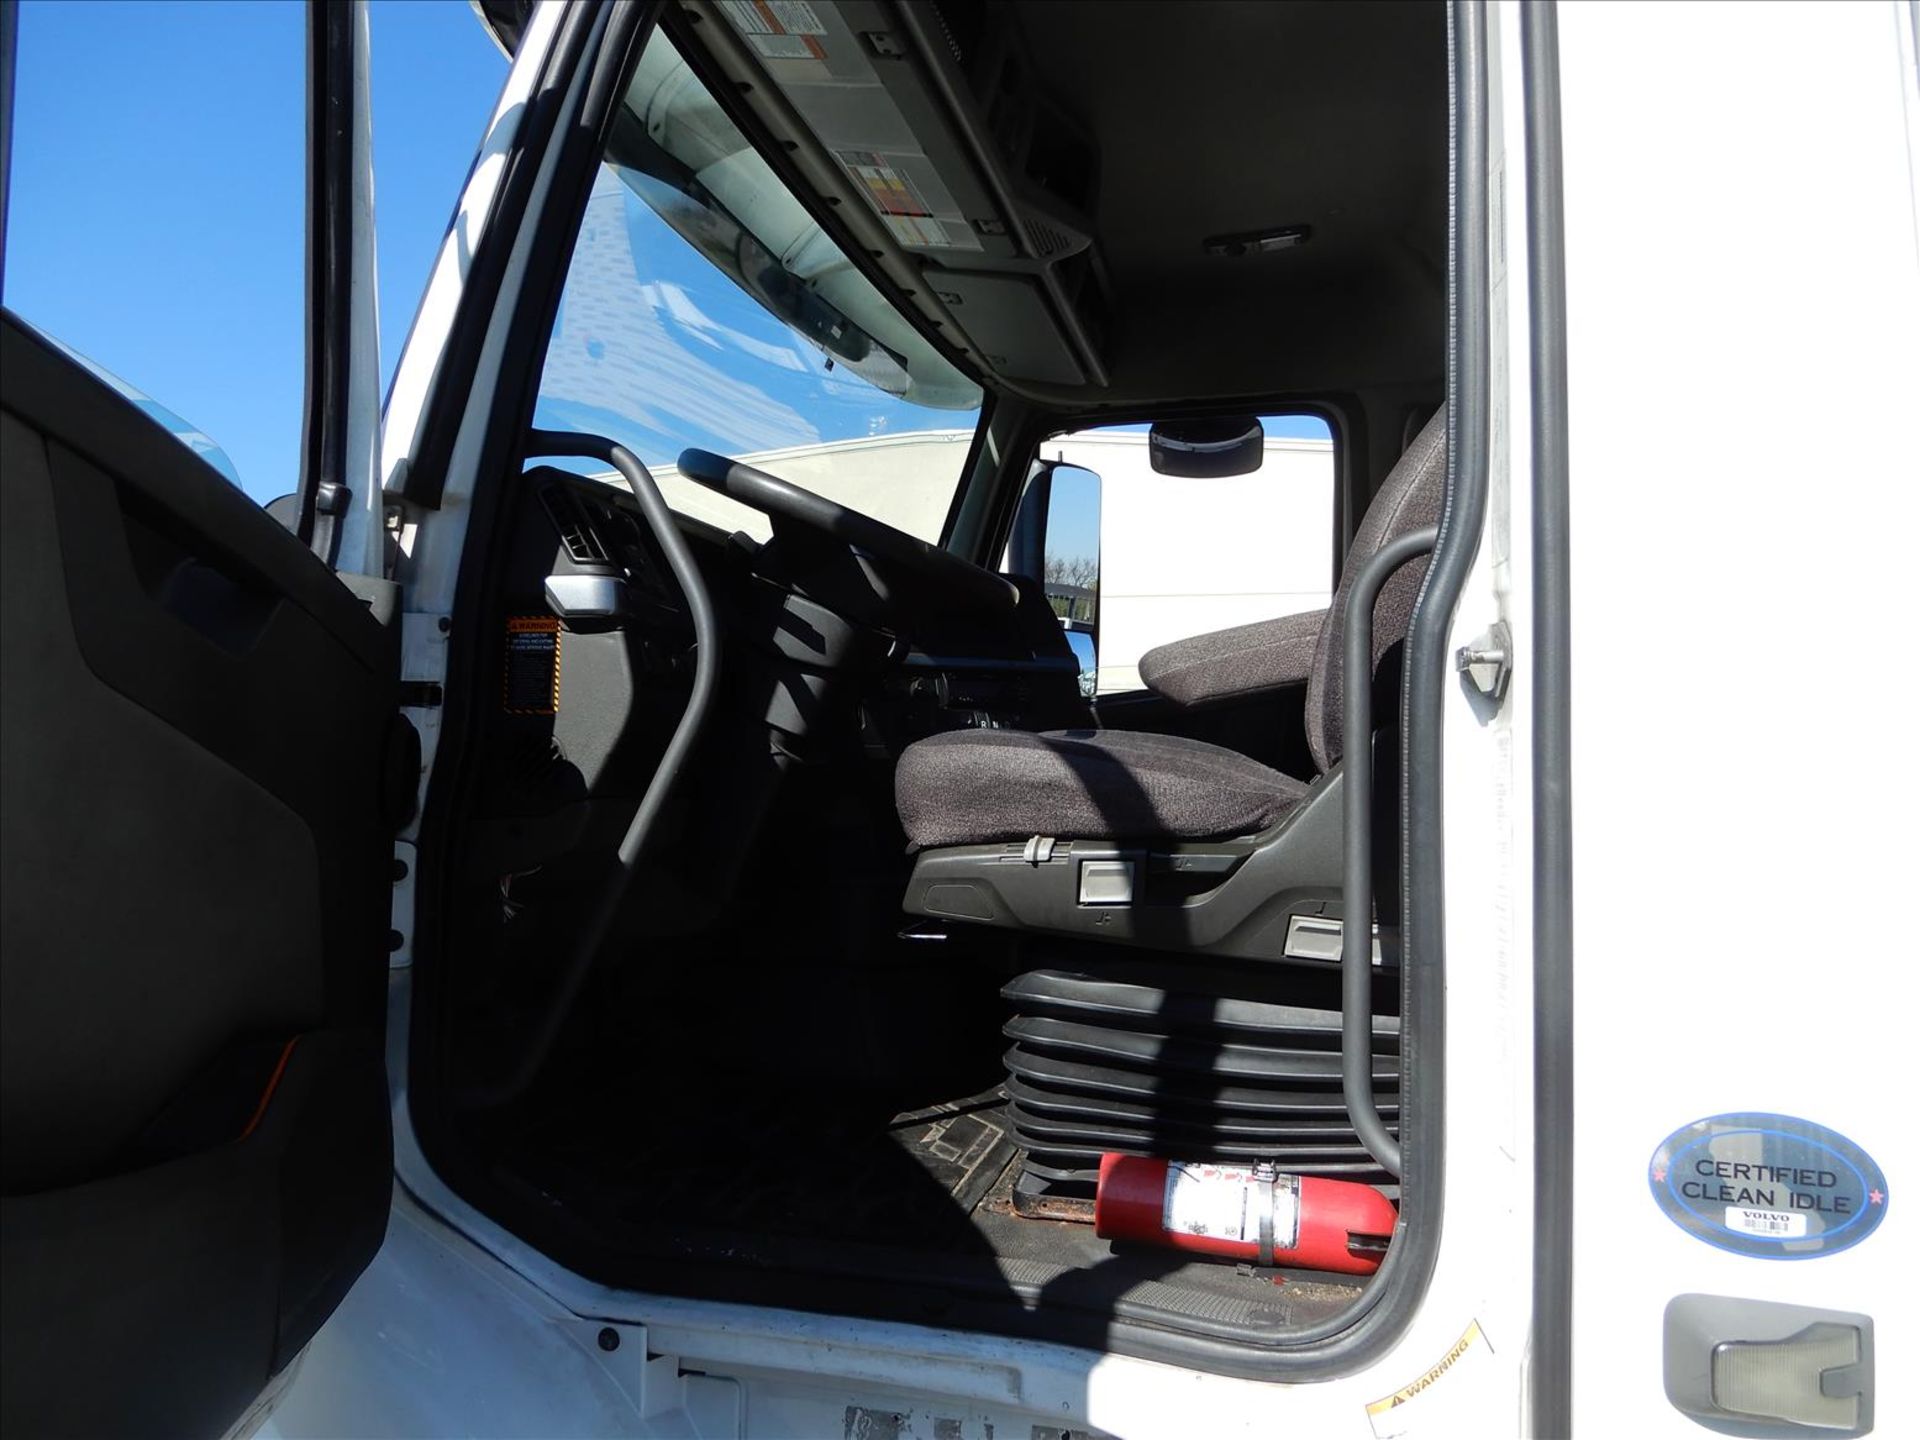 2019 Volvo VNR 300 Daycab Truck Tractor - Located in Murfreesboro, TN - Image 35 of 58